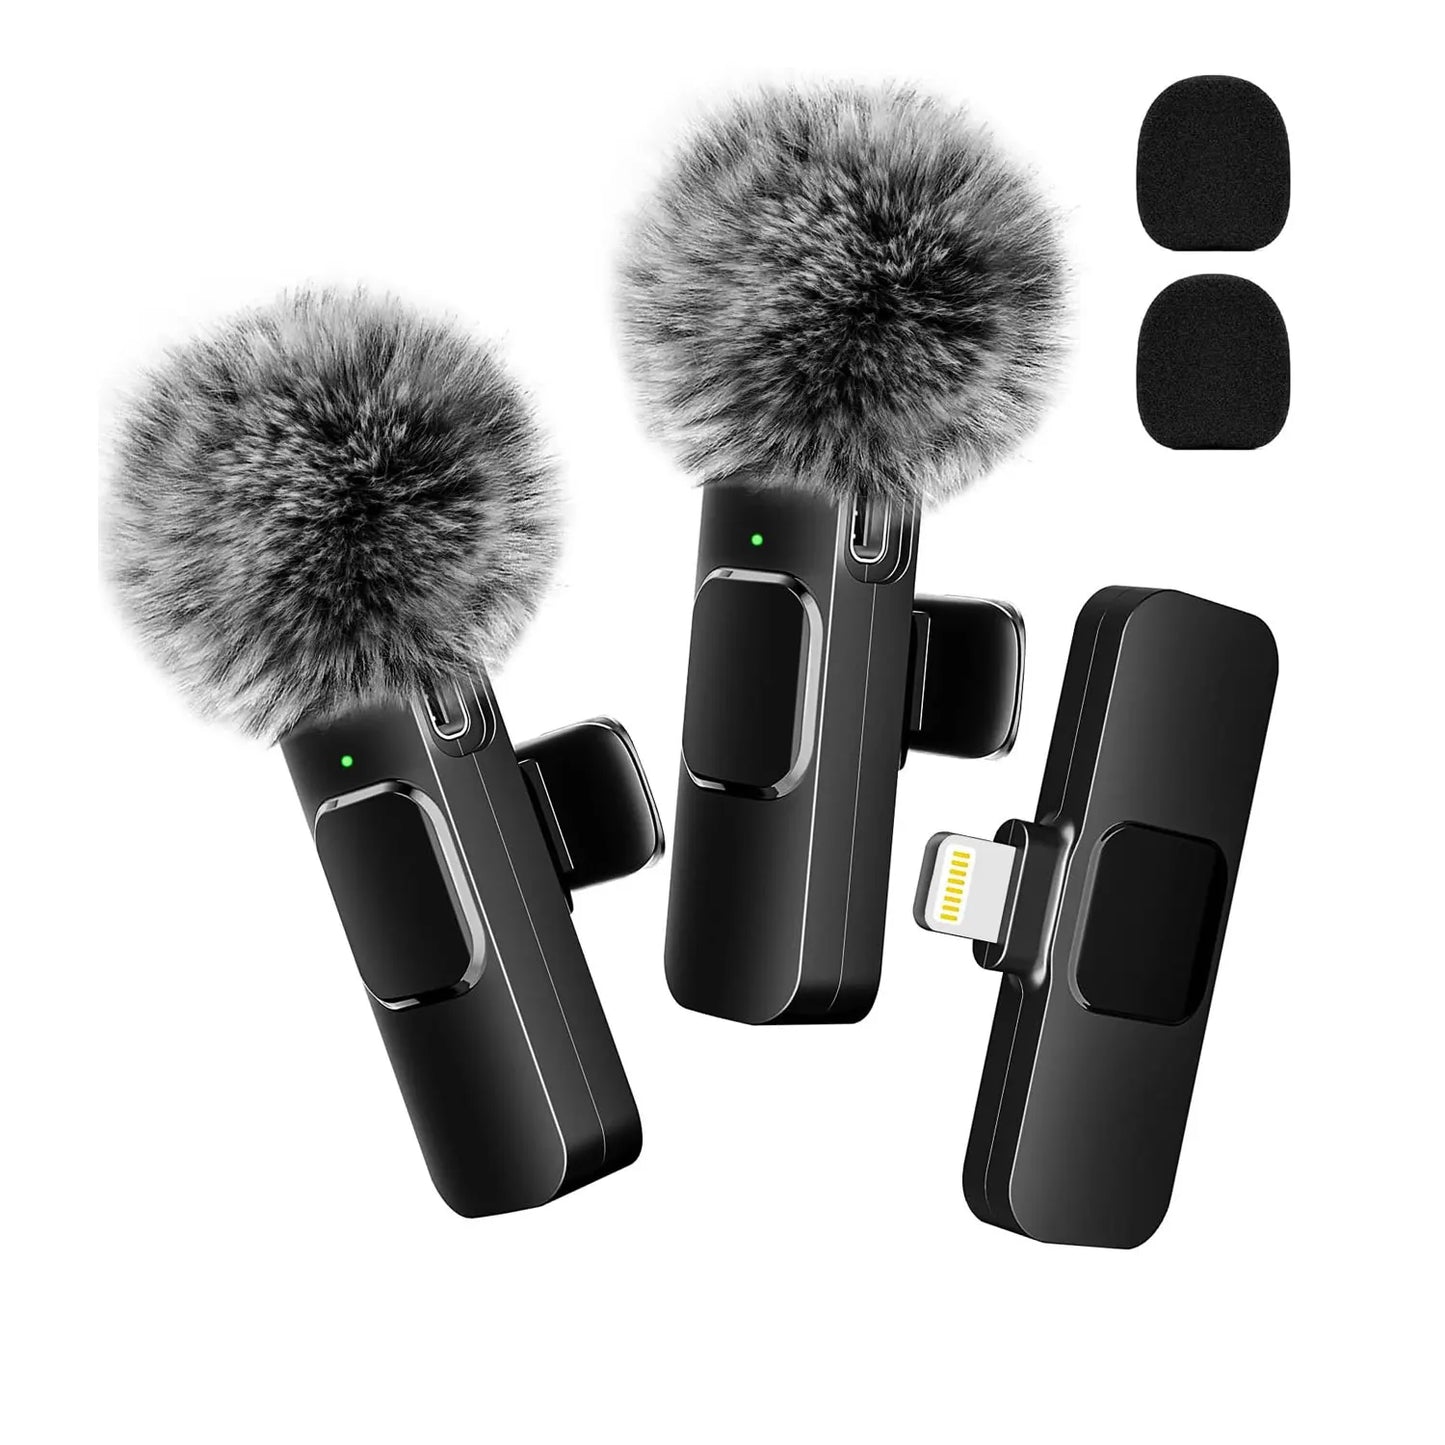 NEW Wireless Lavalier Mini Microphone for iPhone Android